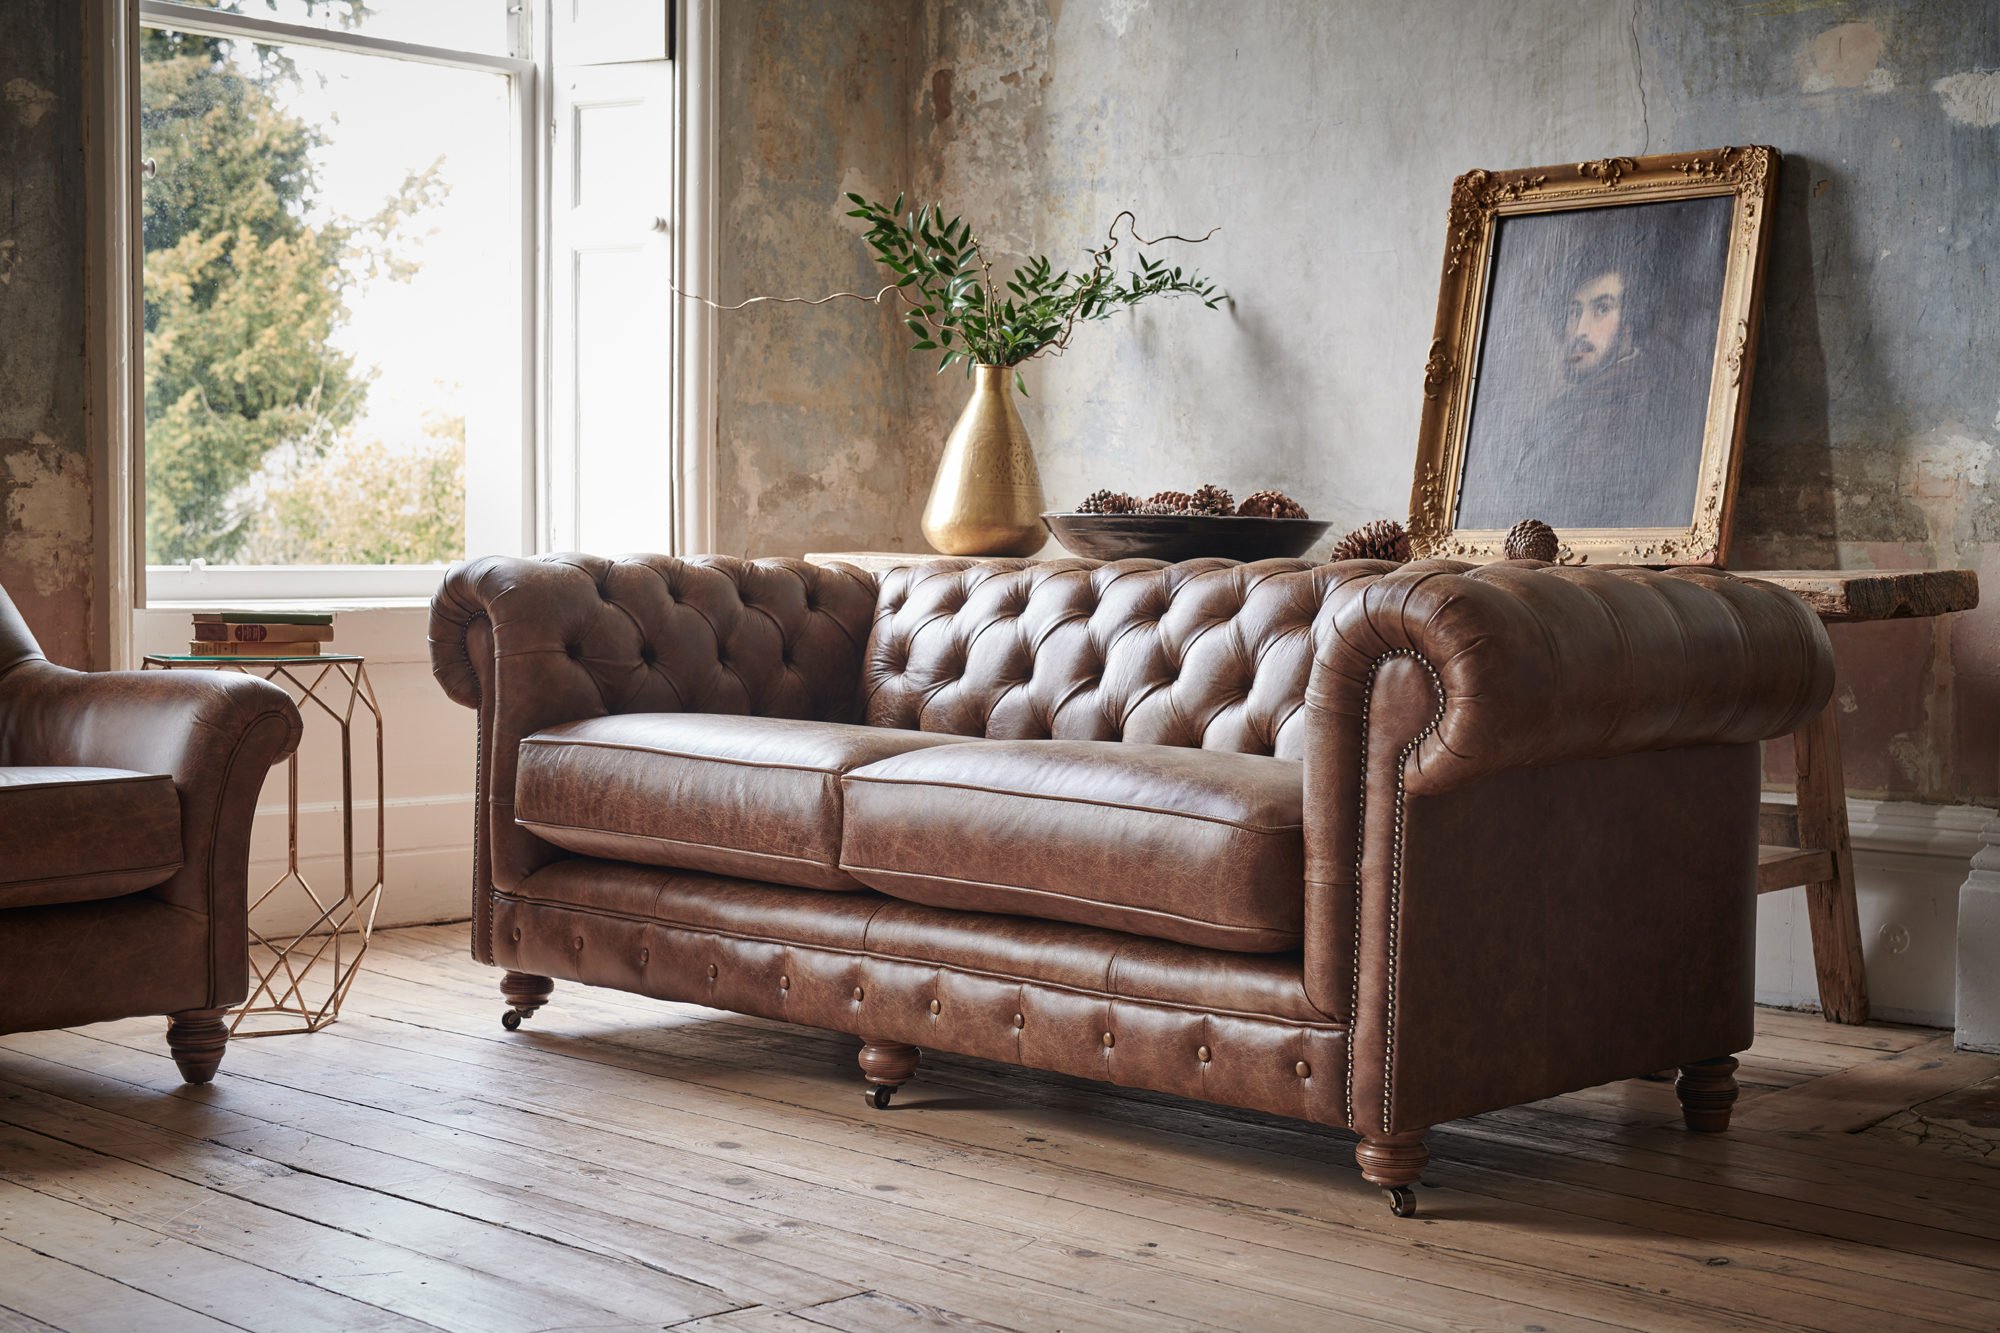 Handmade Leather Chesterfield Sofa, Leather Couch Styles